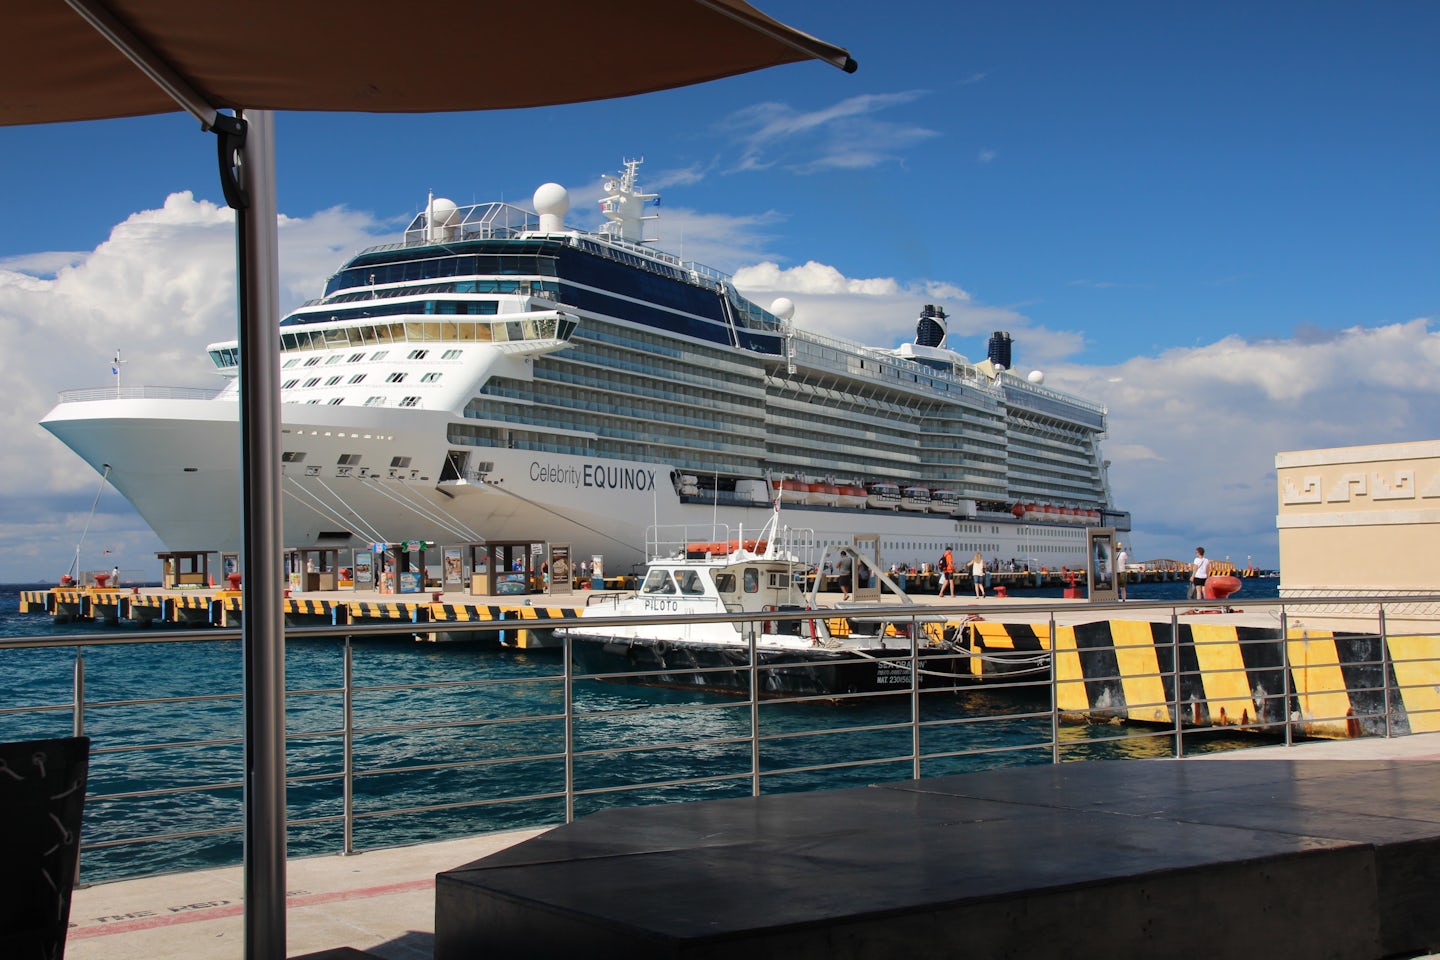 View of the ship from a port restaurant in Cozumel